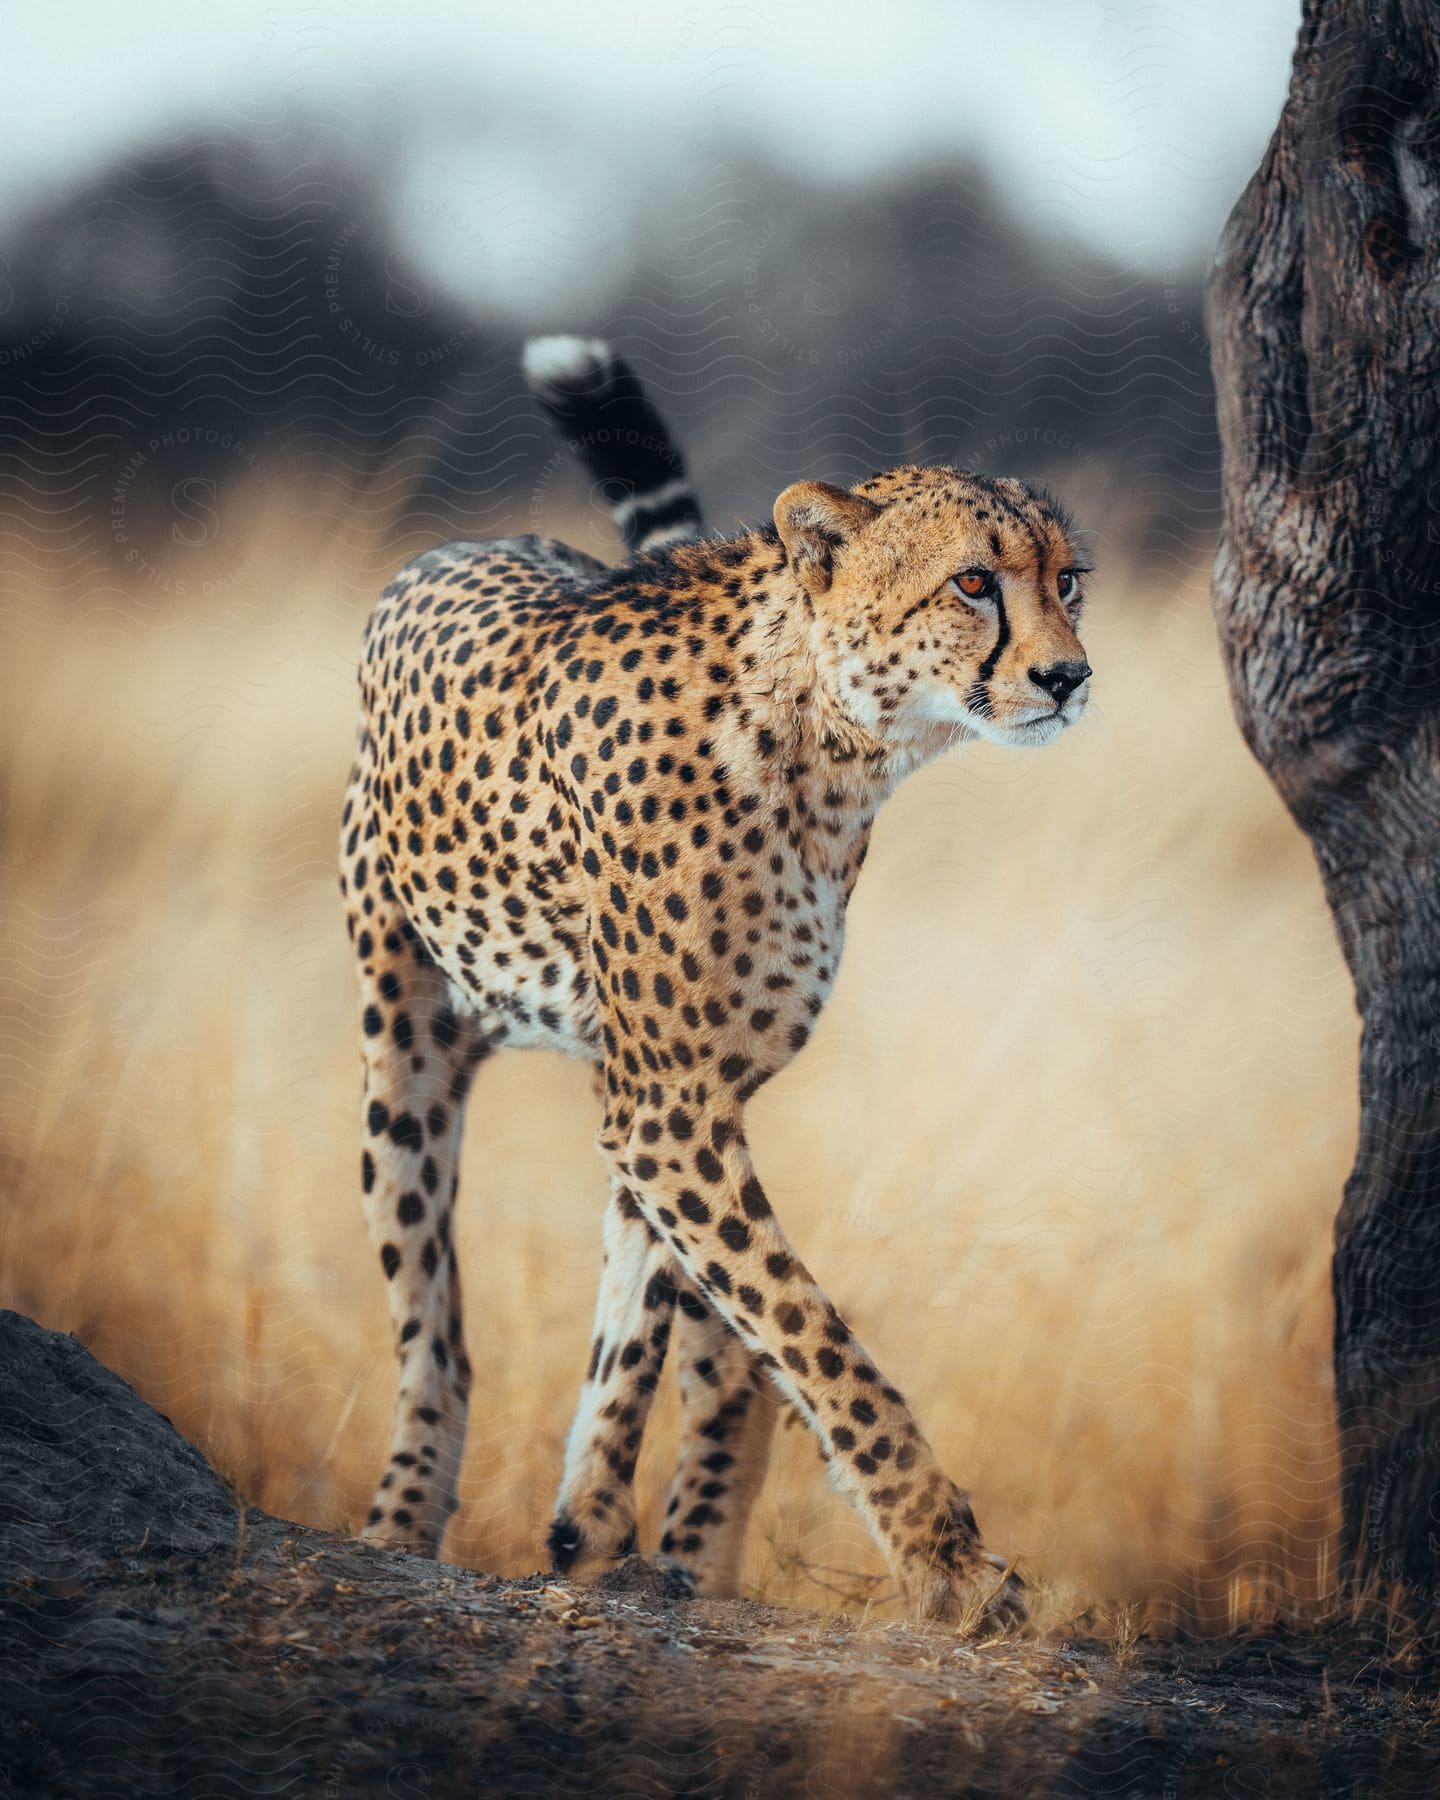 Stock photo of cheetah walking near a tree in the savanna surrounded by yellow dry grass